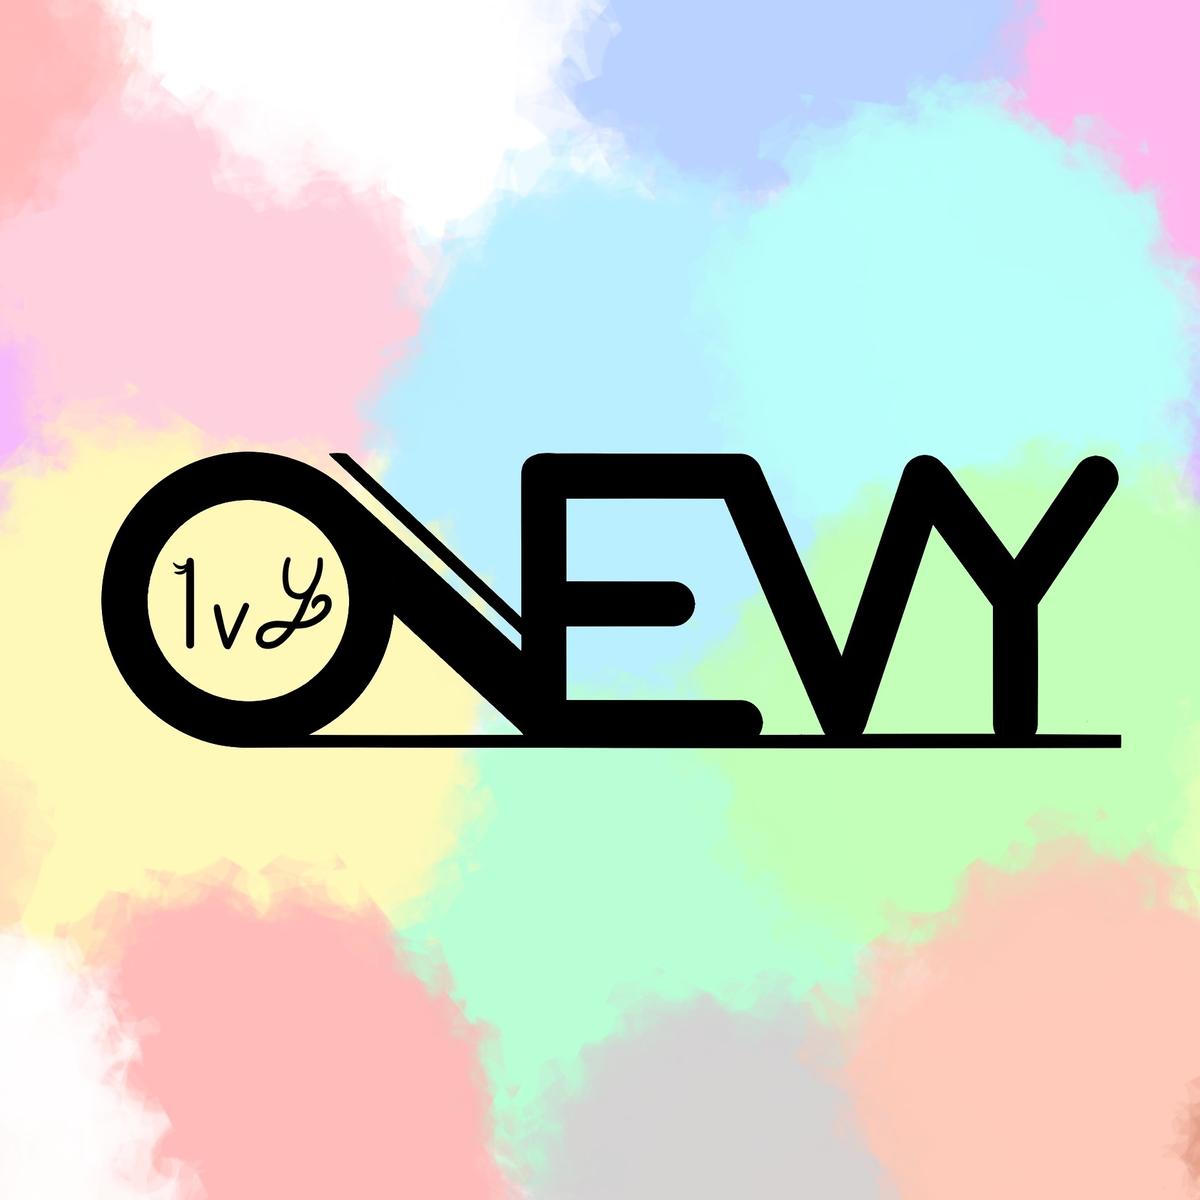 ONEVY